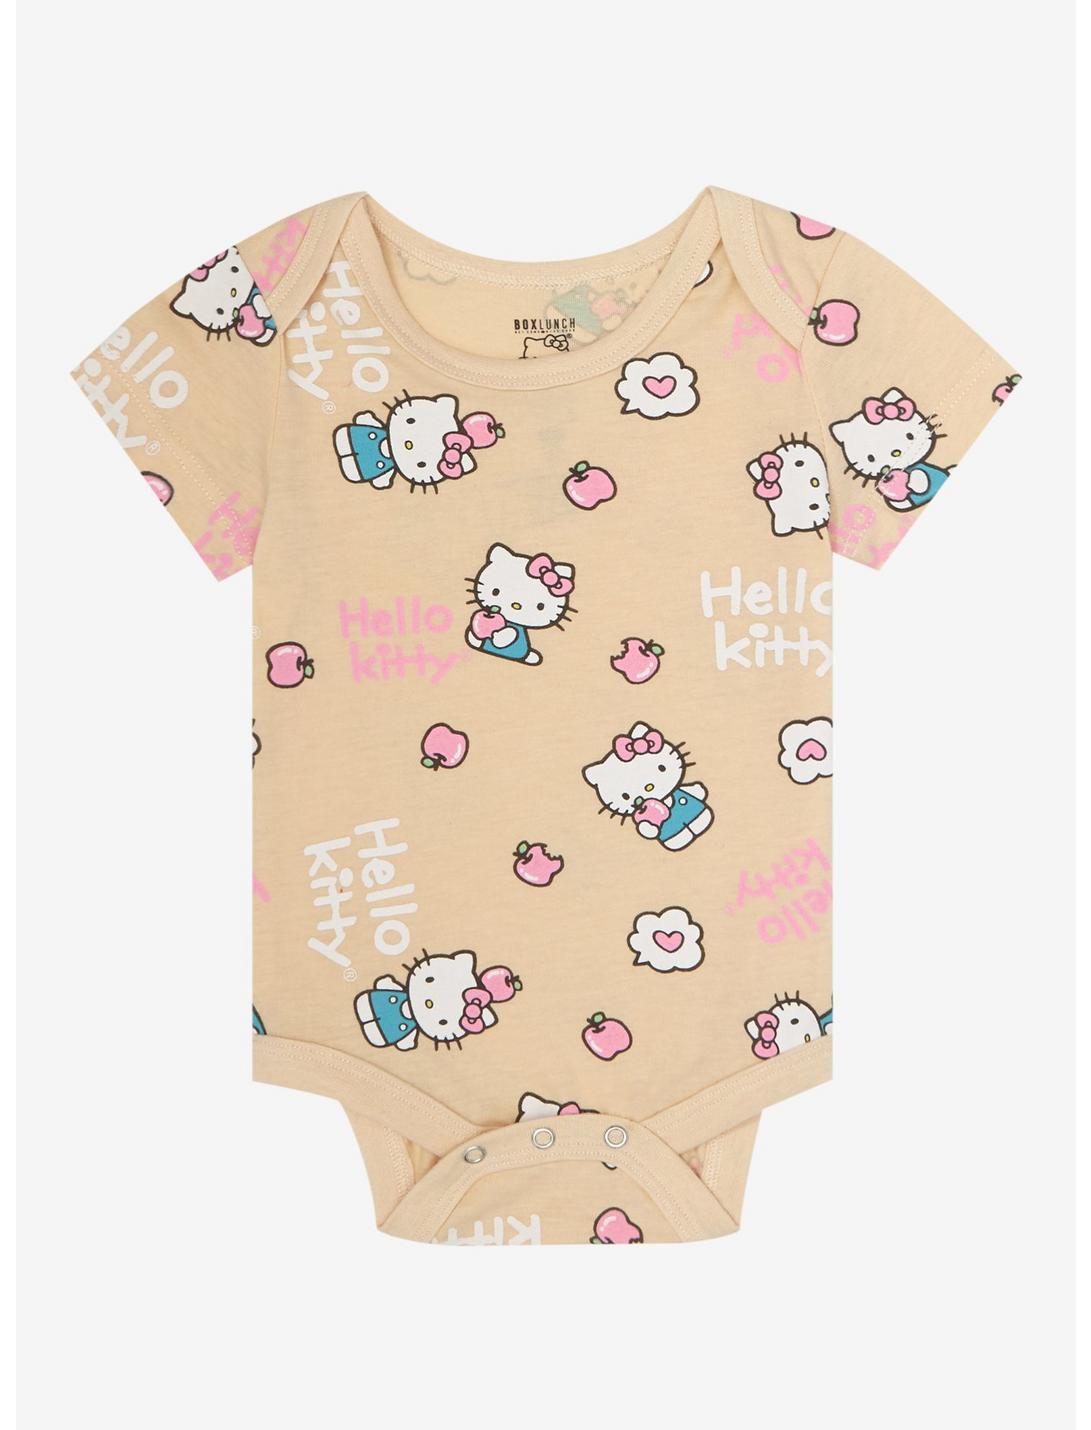 Sanrio Hello Kitty Apple Allover Print Infant One-Piece - BoxLunch Exclusive, PEACH, hi-res